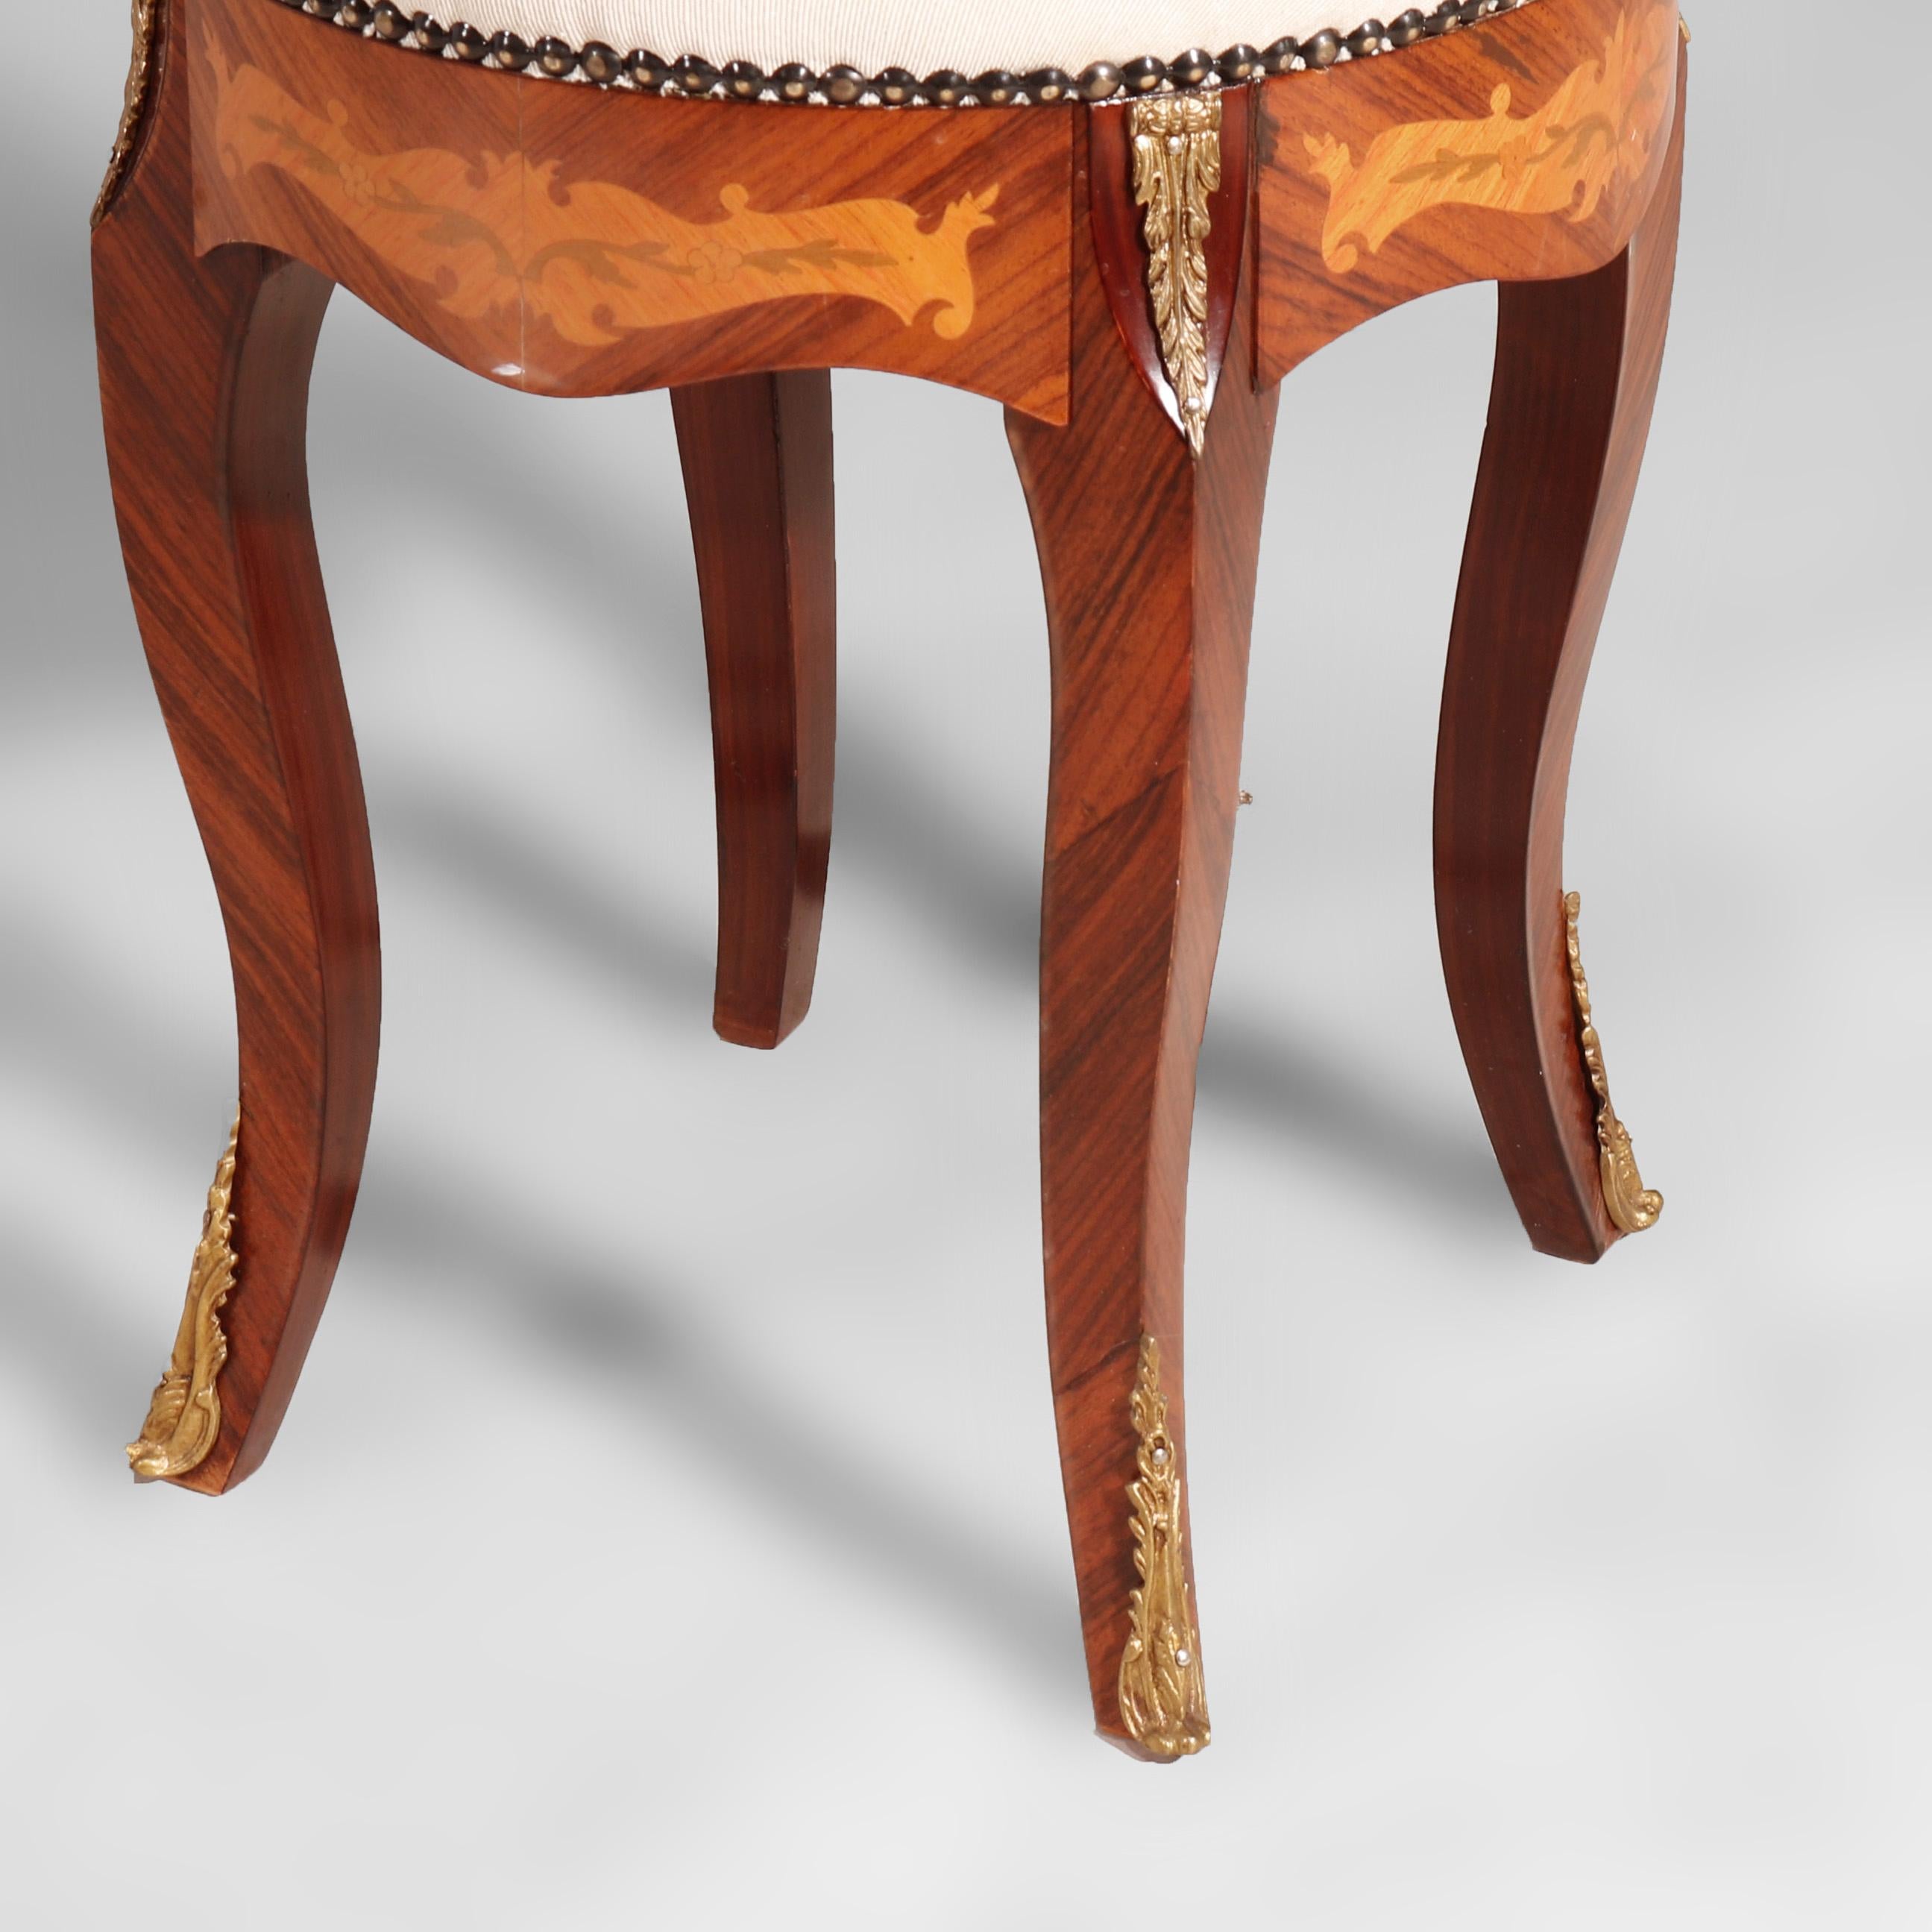 Upholstery French Louis XIV Kingwood & Satinwood Inlaid Stool with Tapestry Seat 20th C